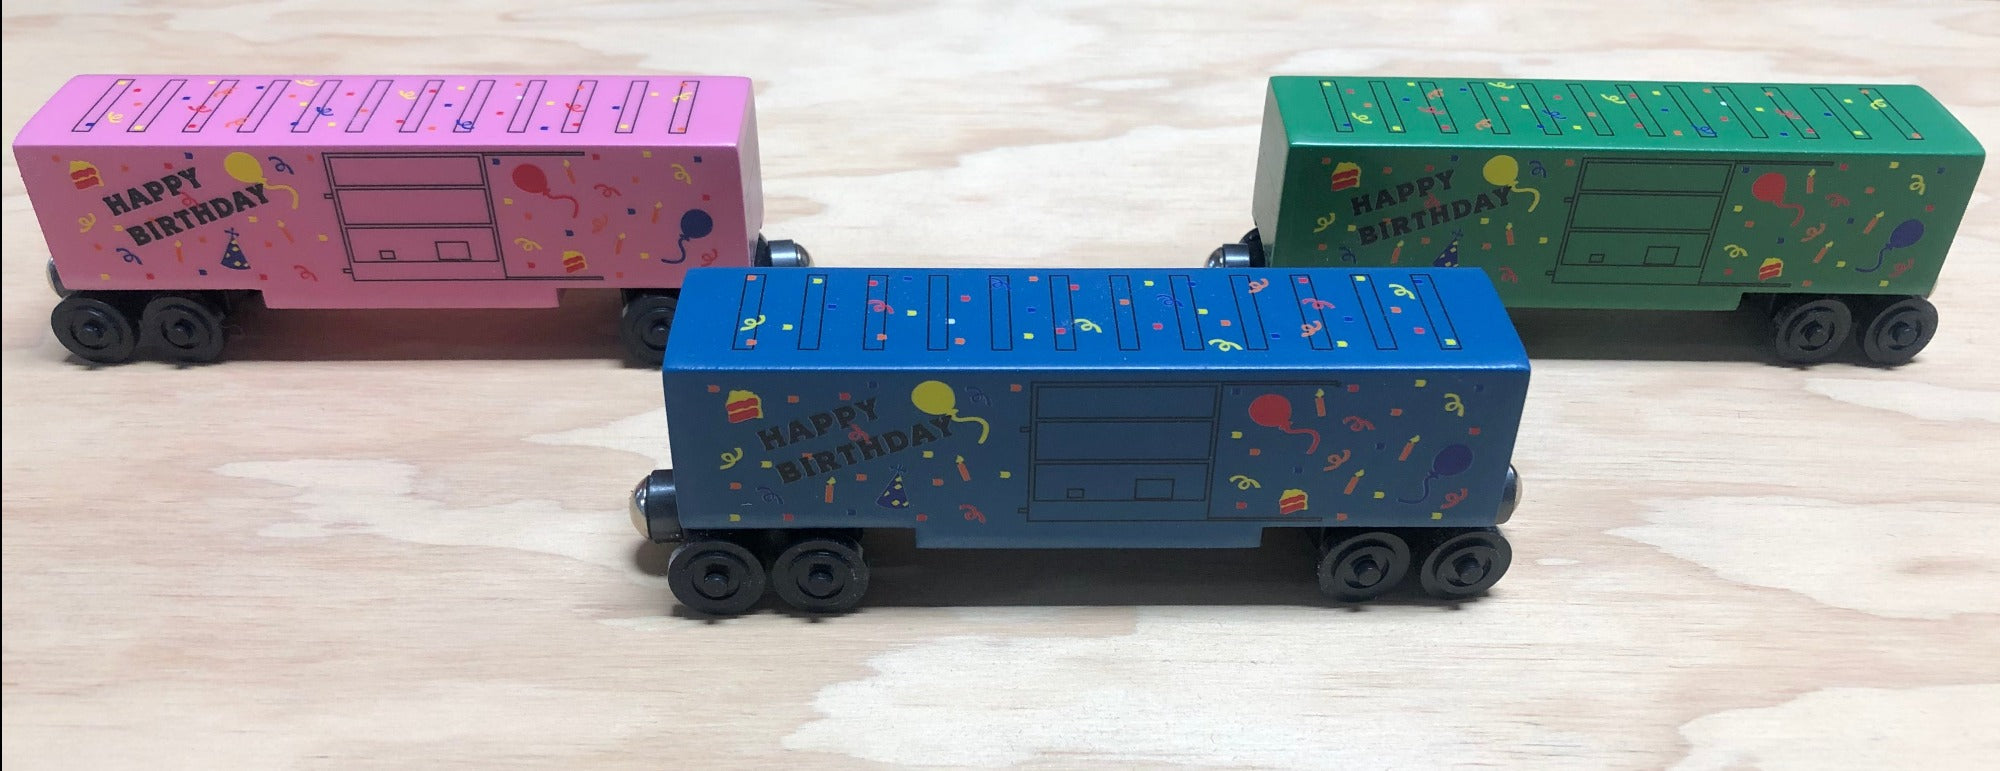 Birthday Toy Train Boxcars by The Whittle Shortline Railroad